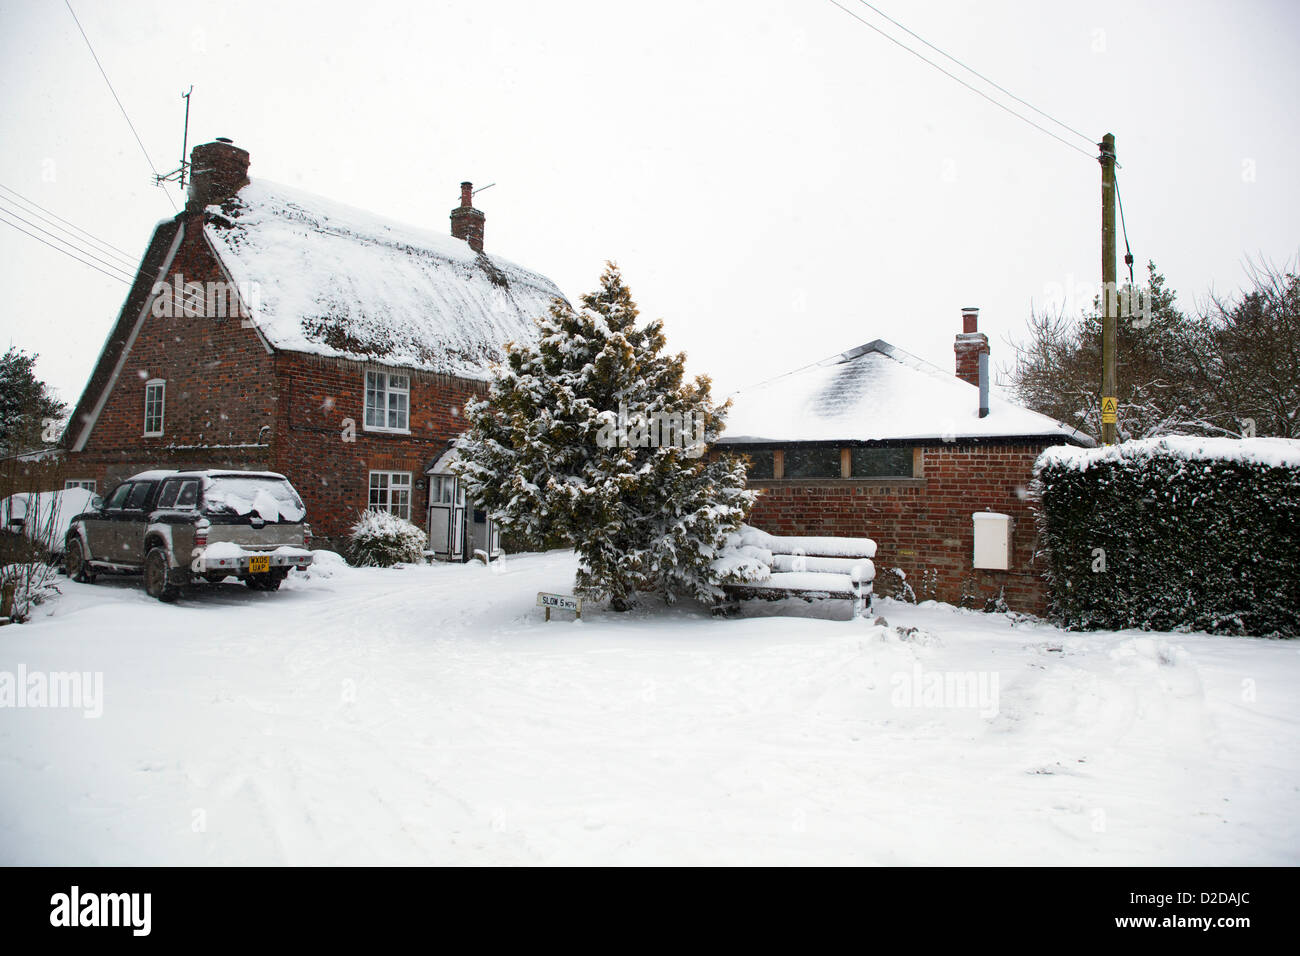 Village Houses or cottages in the snow Stock Photo